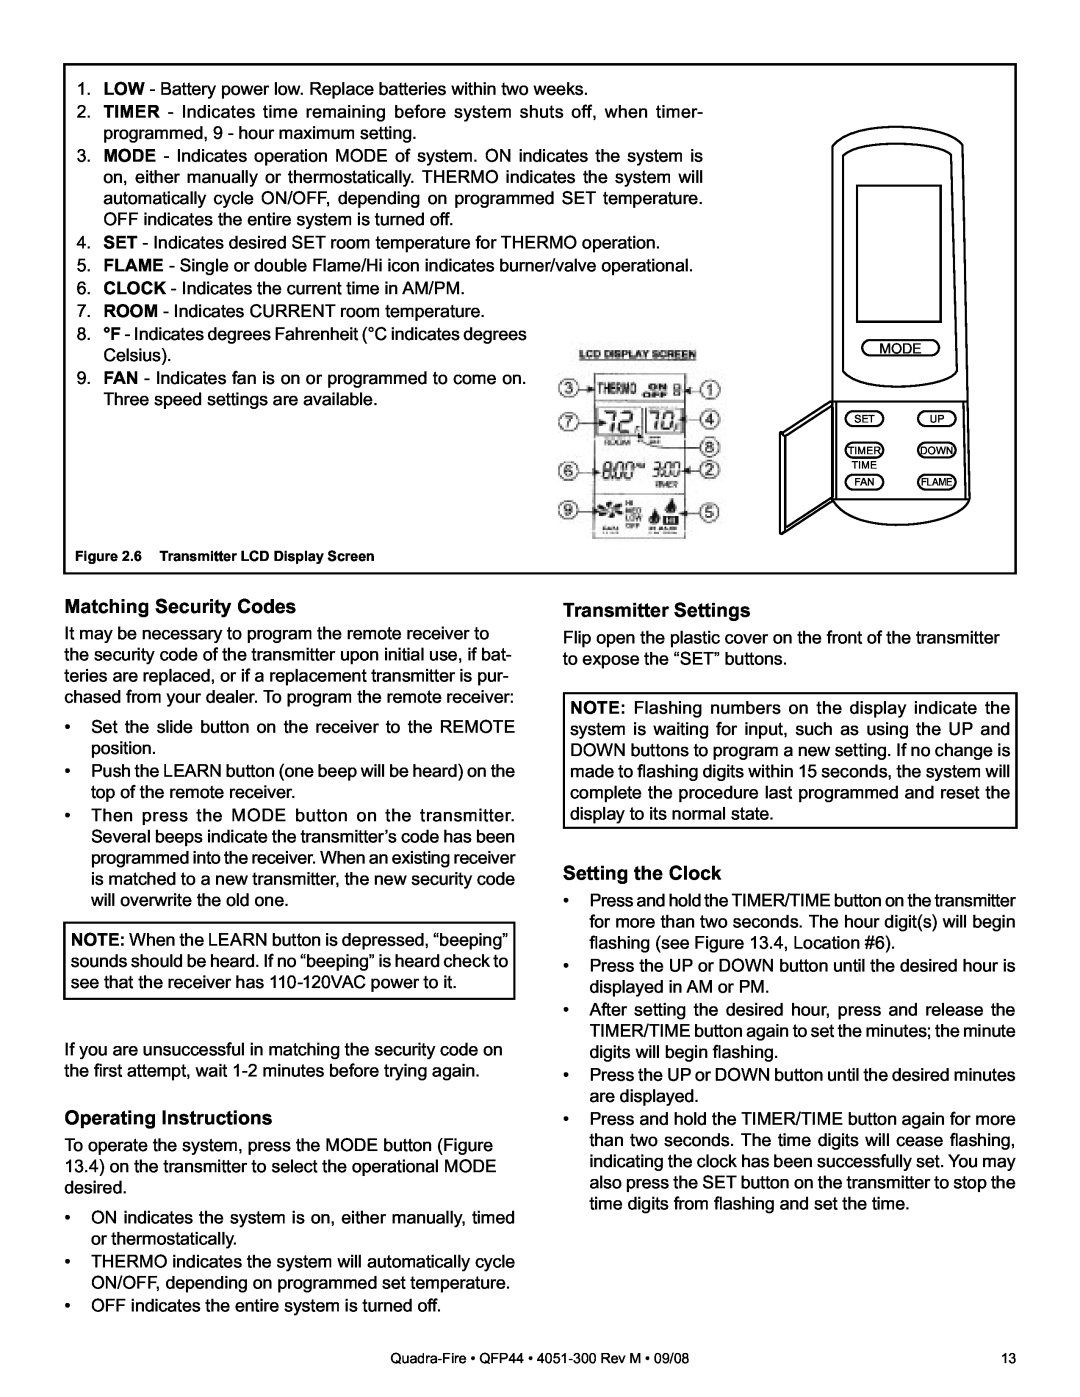 Quadra-Fire QFP44 owner manual Matching Security Codes, Operating Instructions, Transmitter Settings, Setting the Clock 